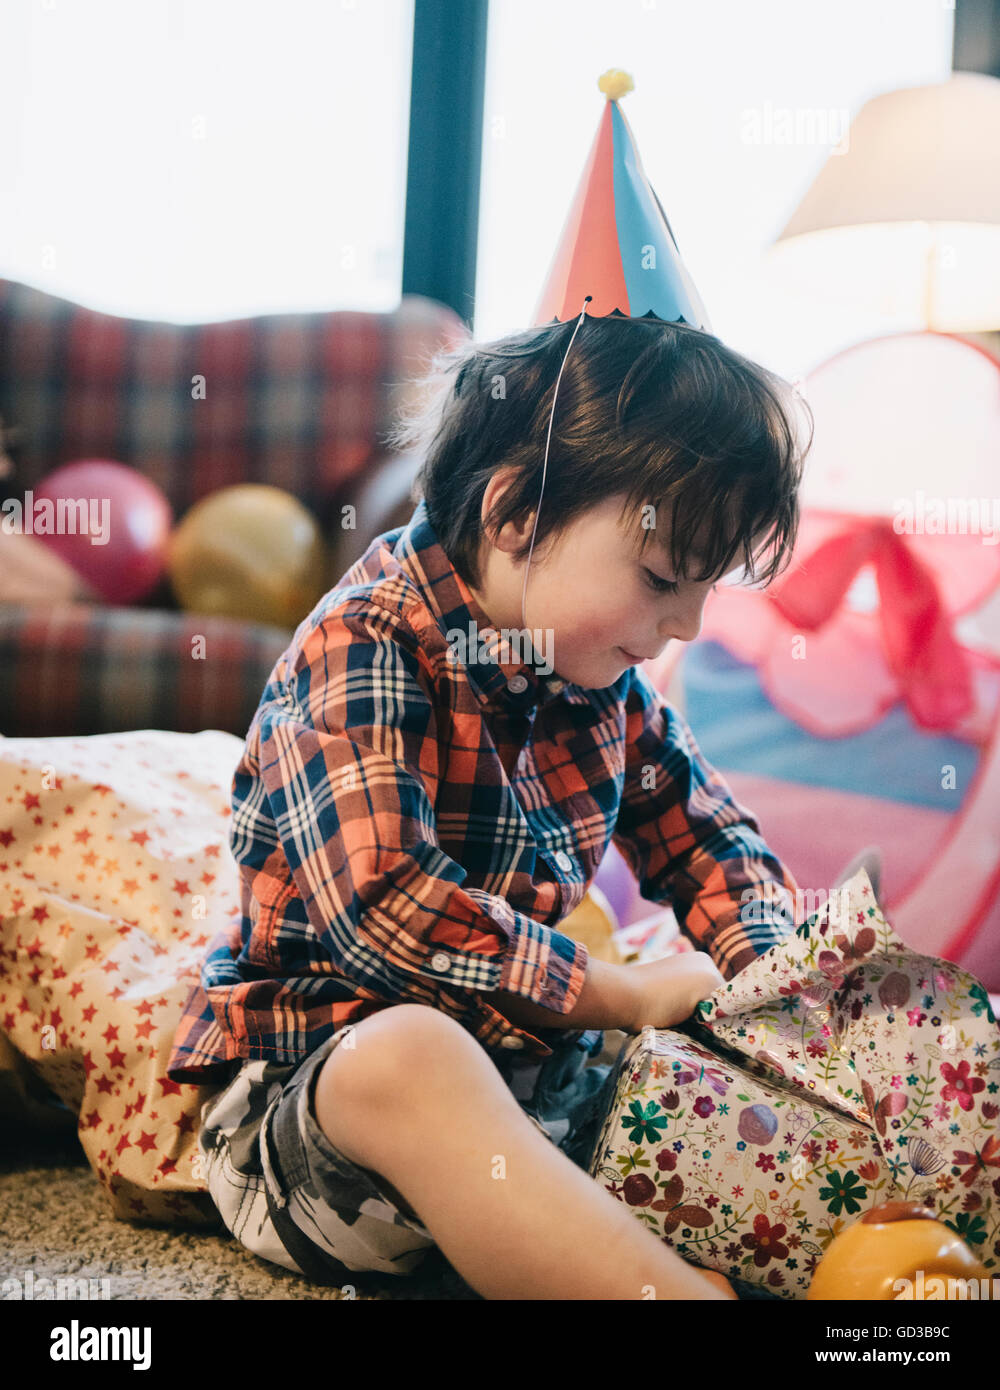 A boy unwrapping his presents at his birthday party. Stock Photo